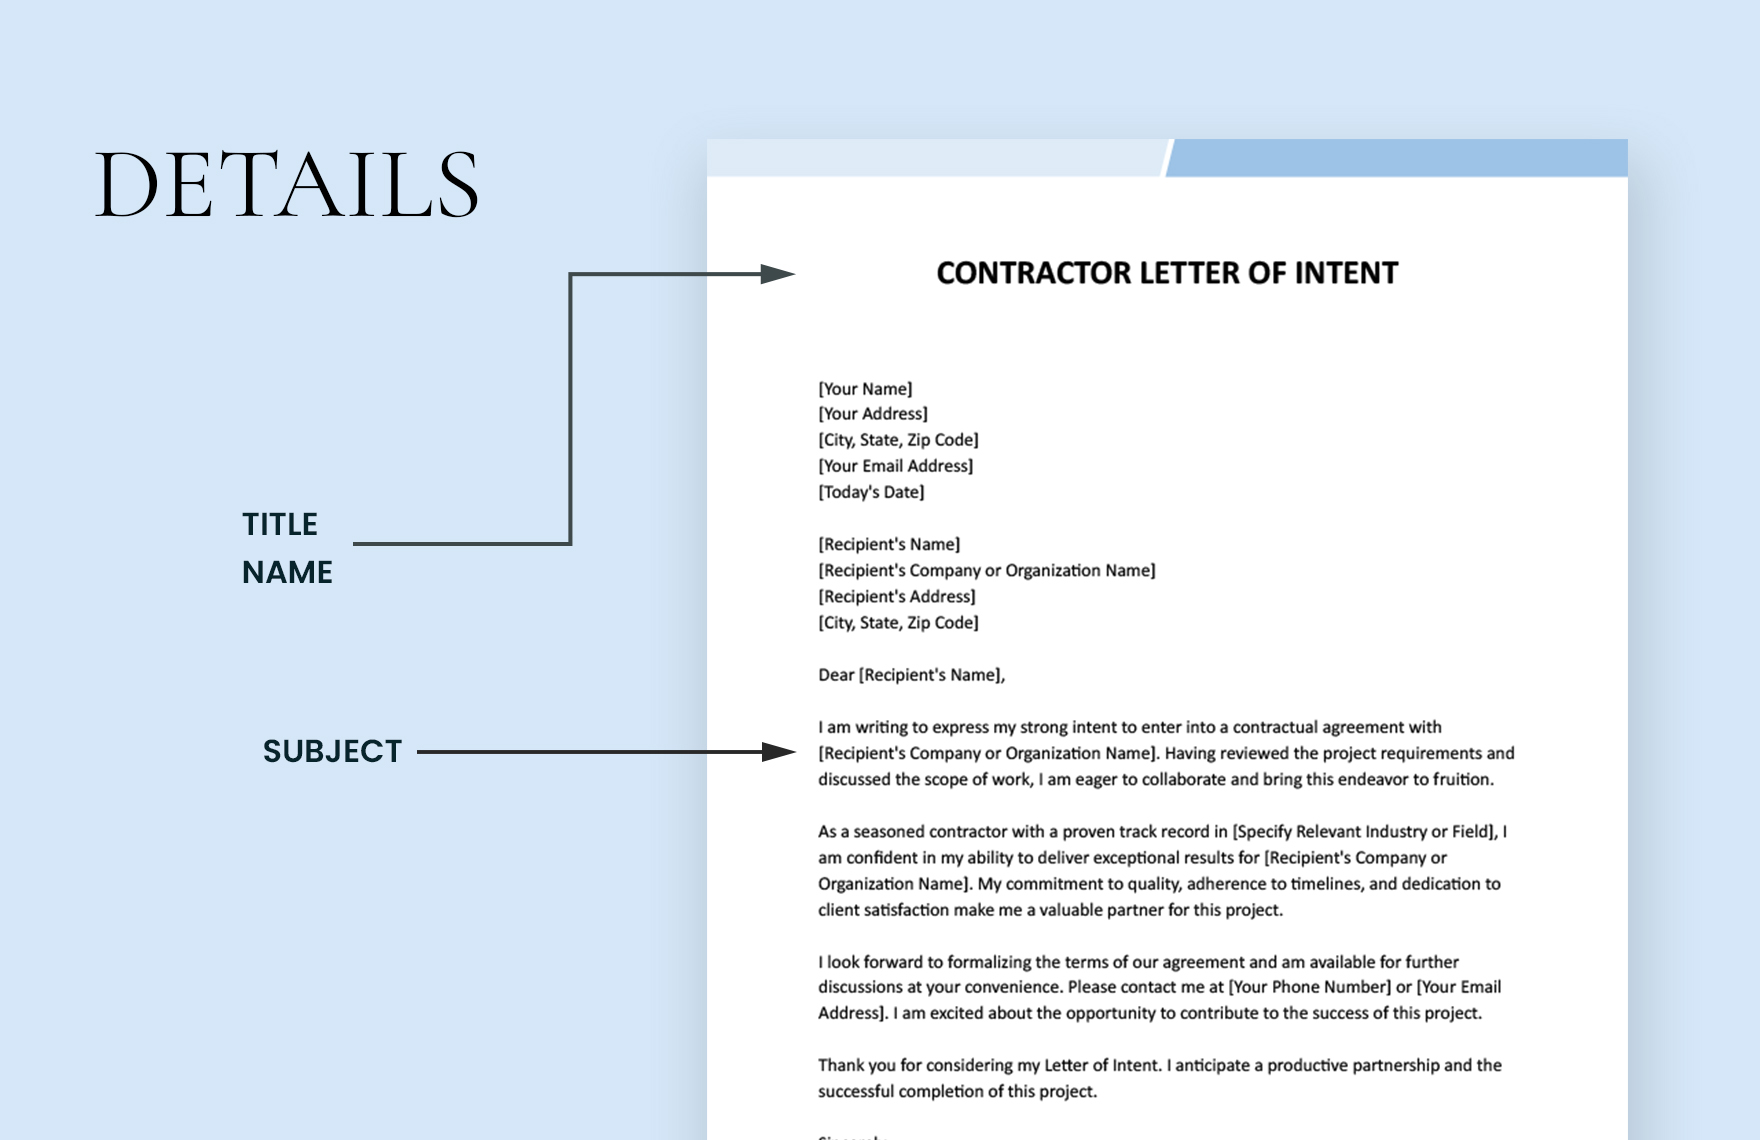 Contractor Letter of Intent